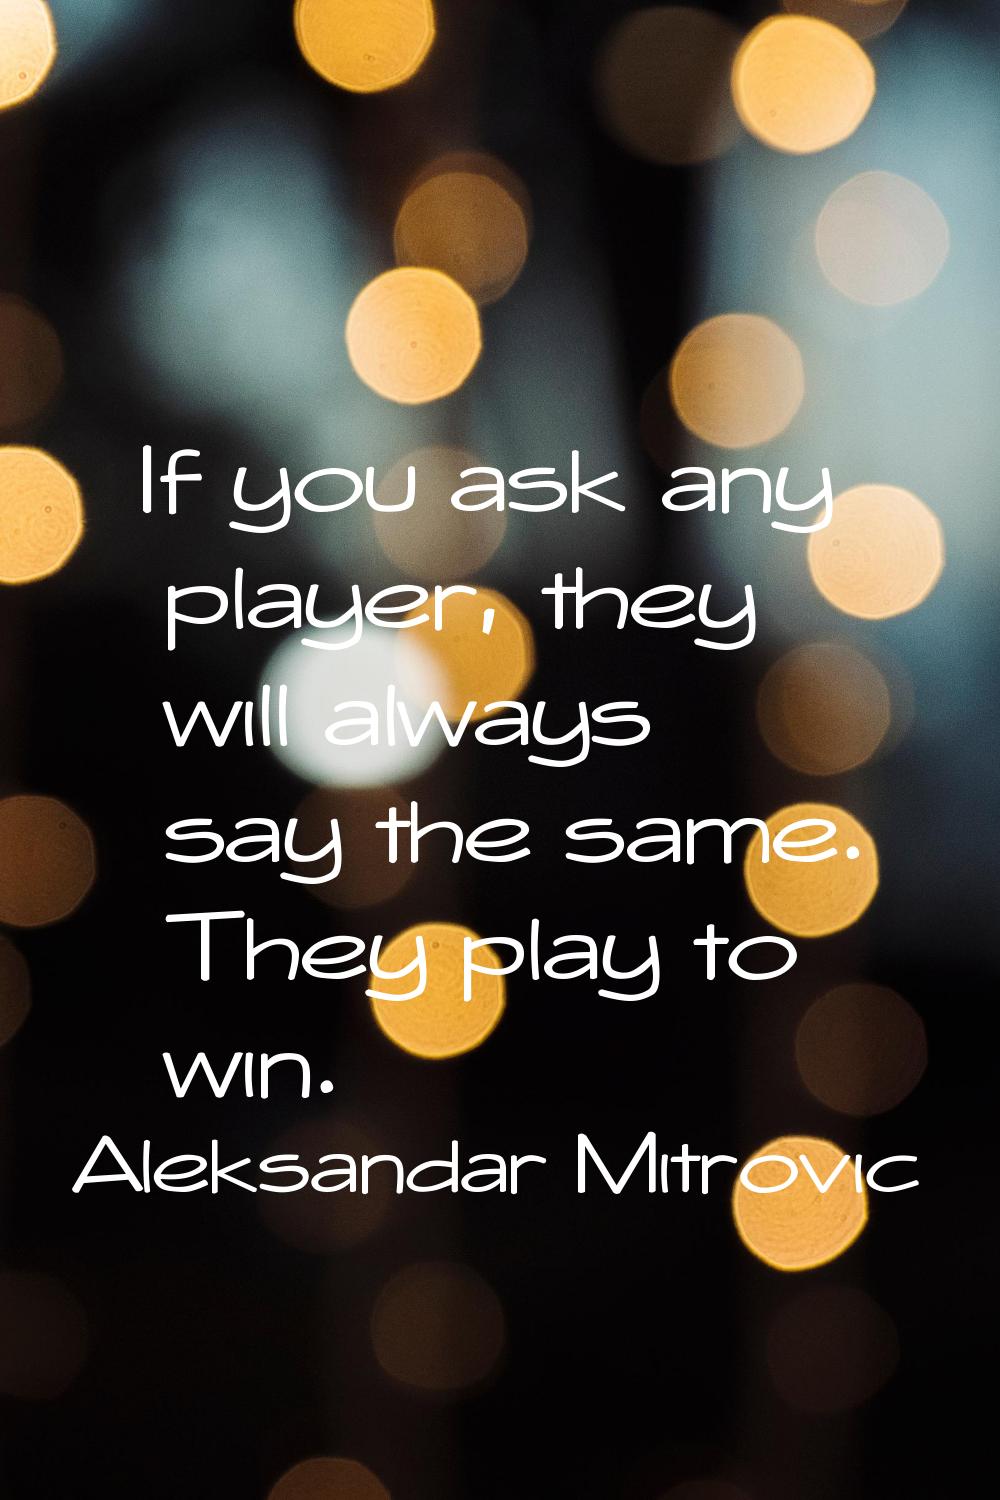 If you ask any player, they will always say the same. They play to win.